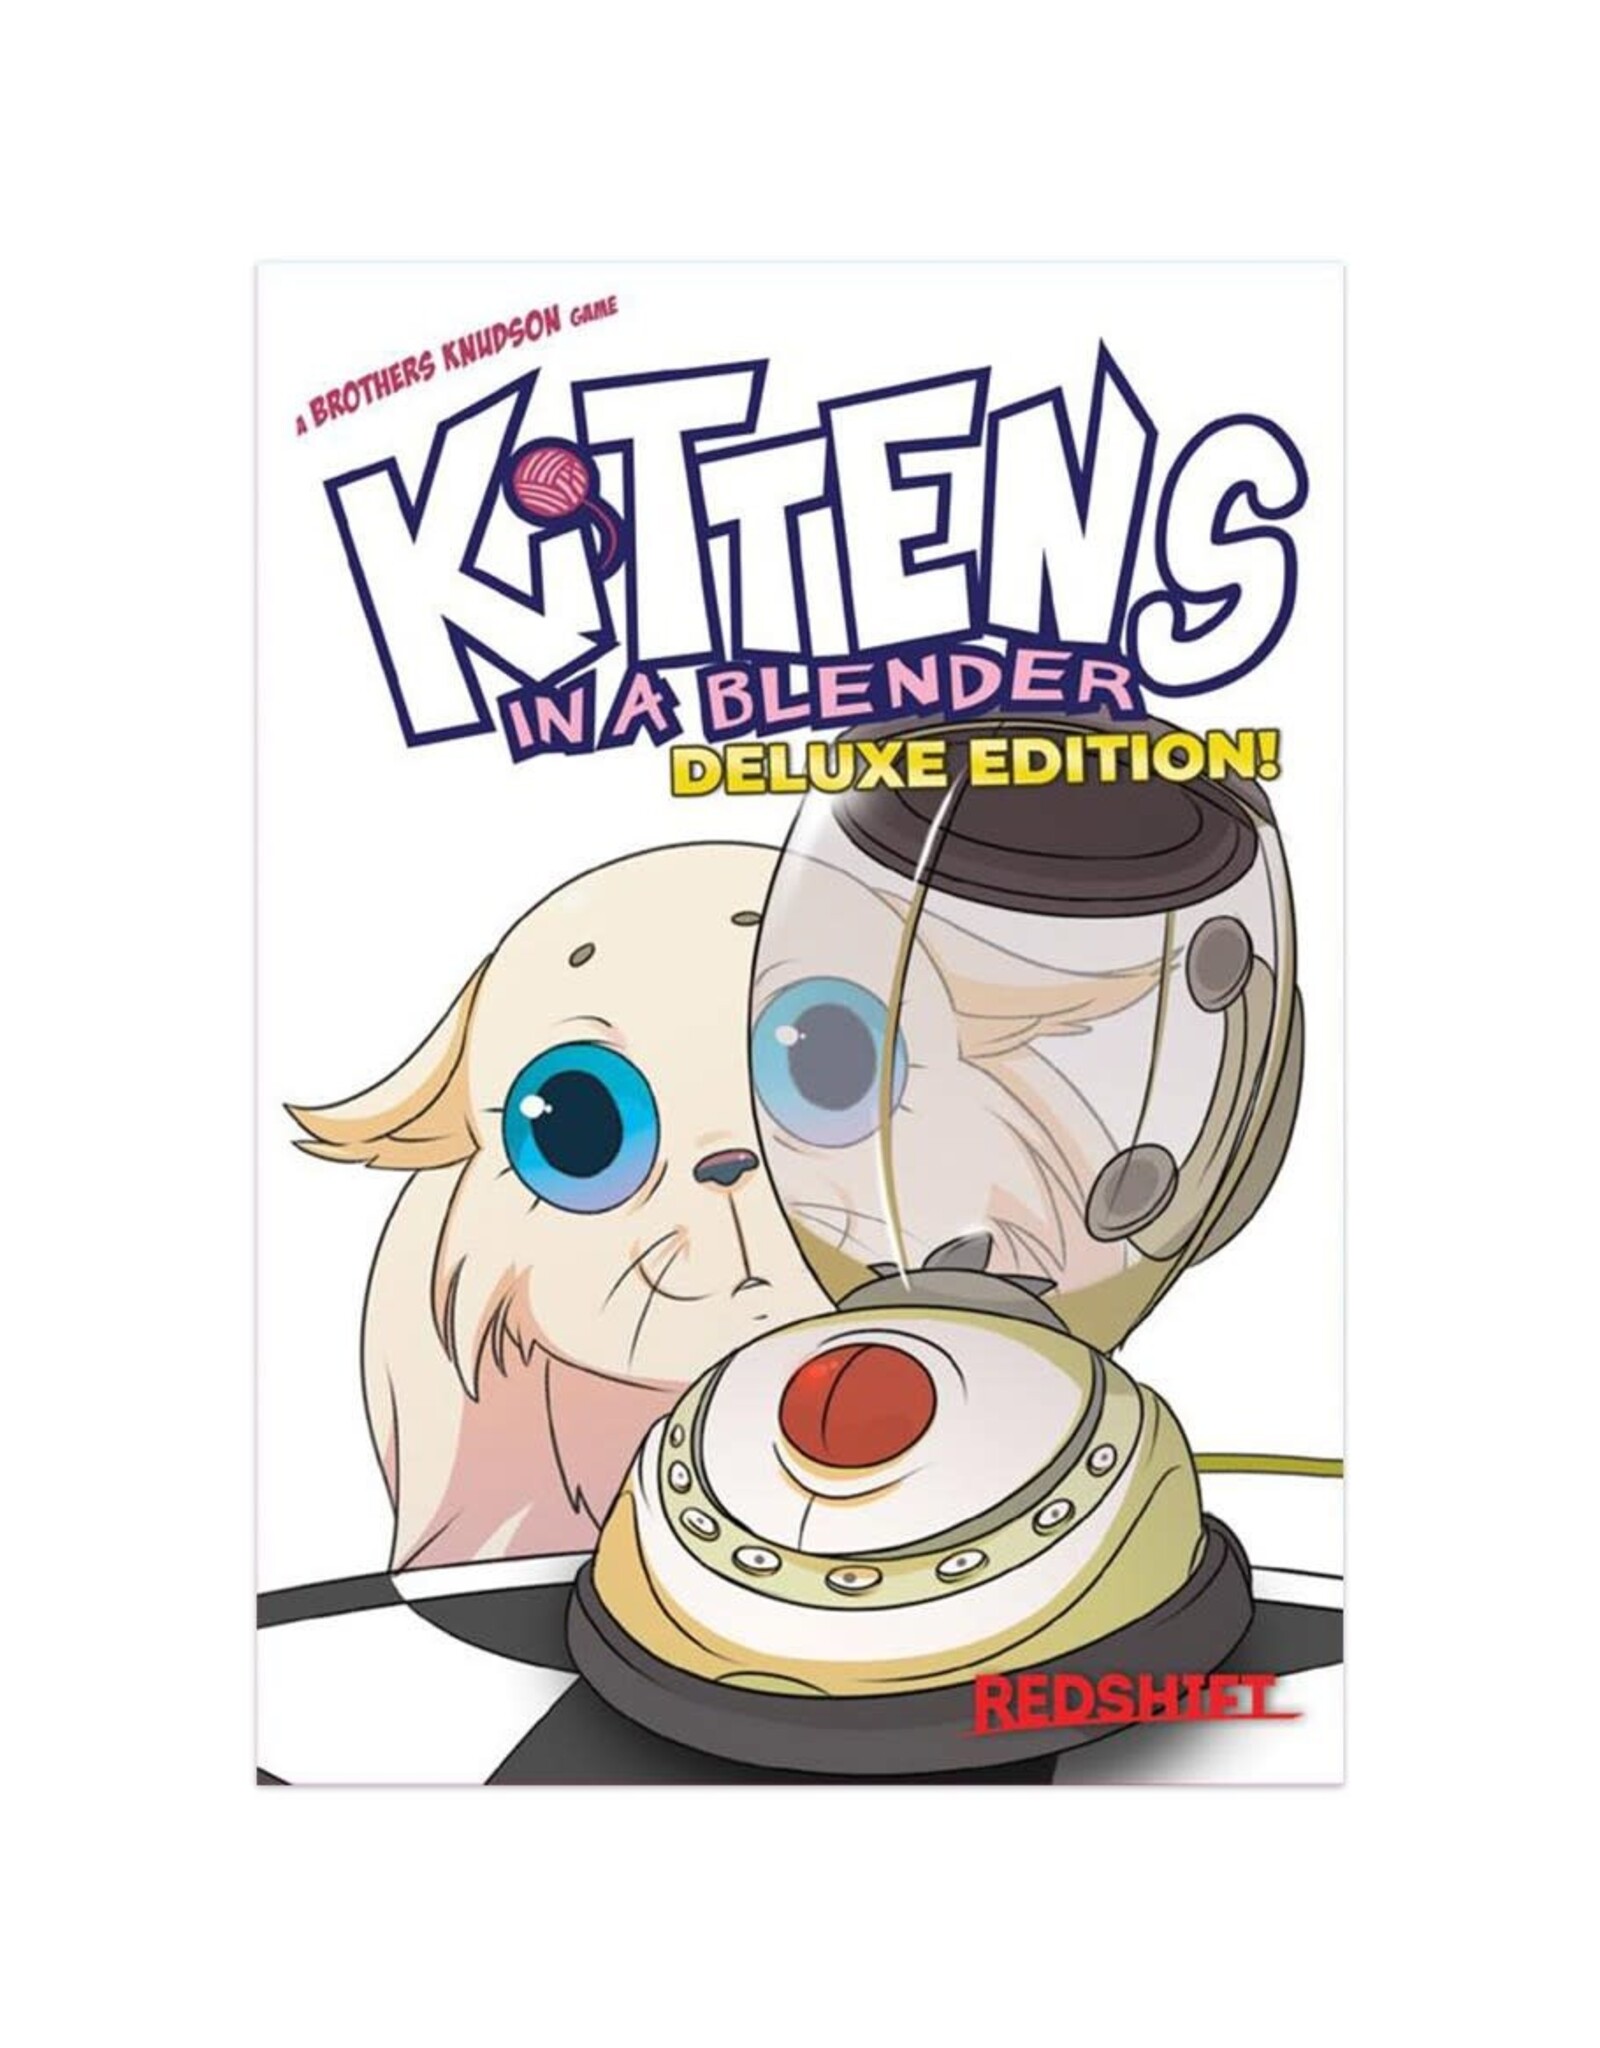 Redshift Kittens in a Blender Deluxe Edition